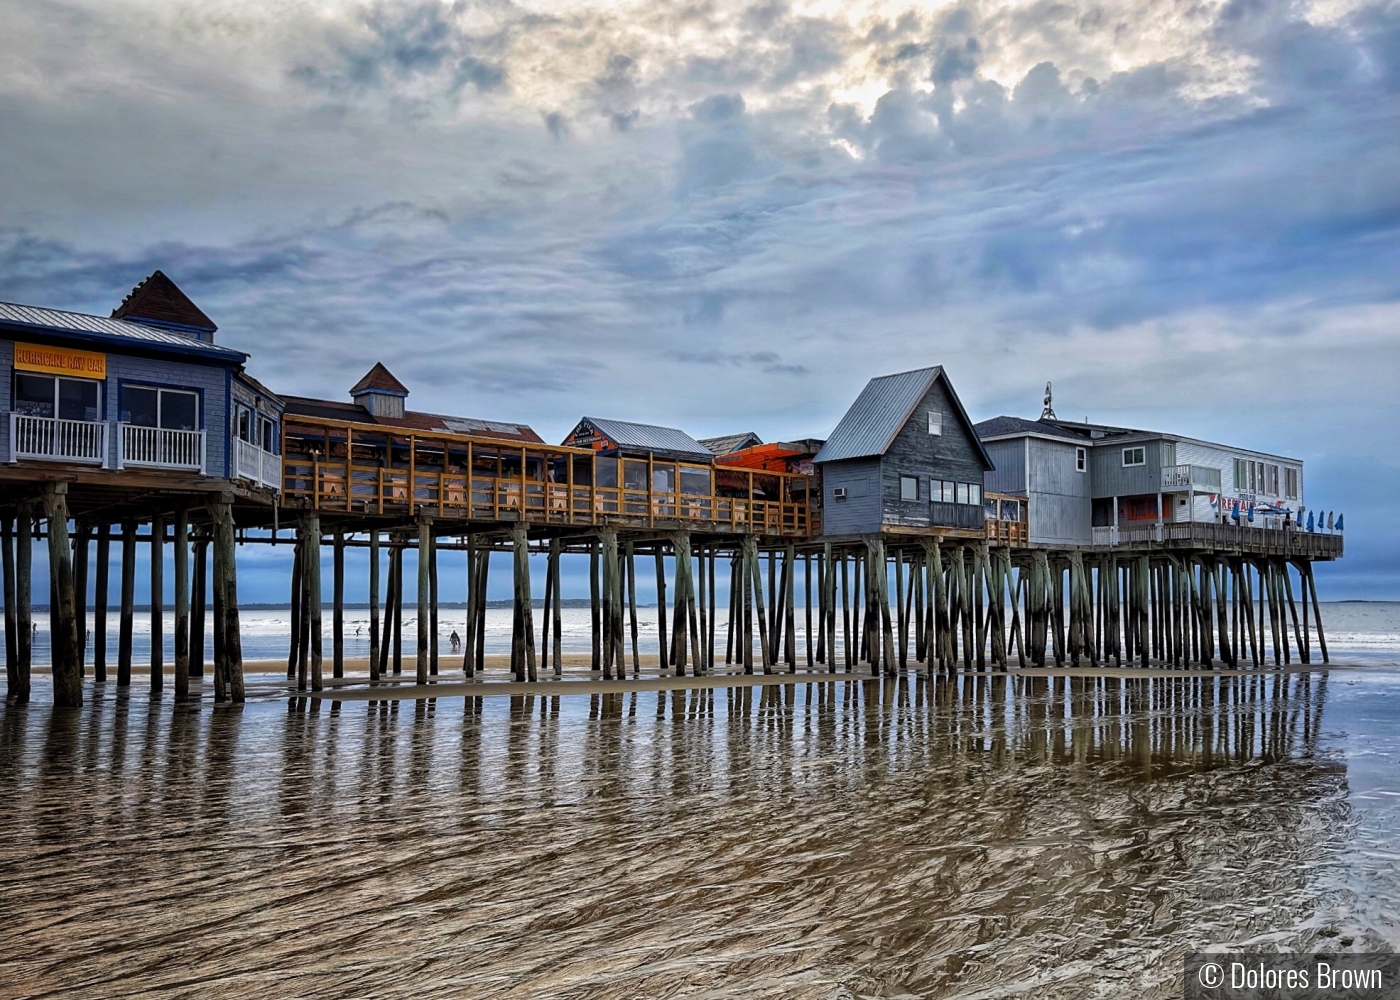 The Pier at Old Orchard Beach, Maine by Dolores Brown